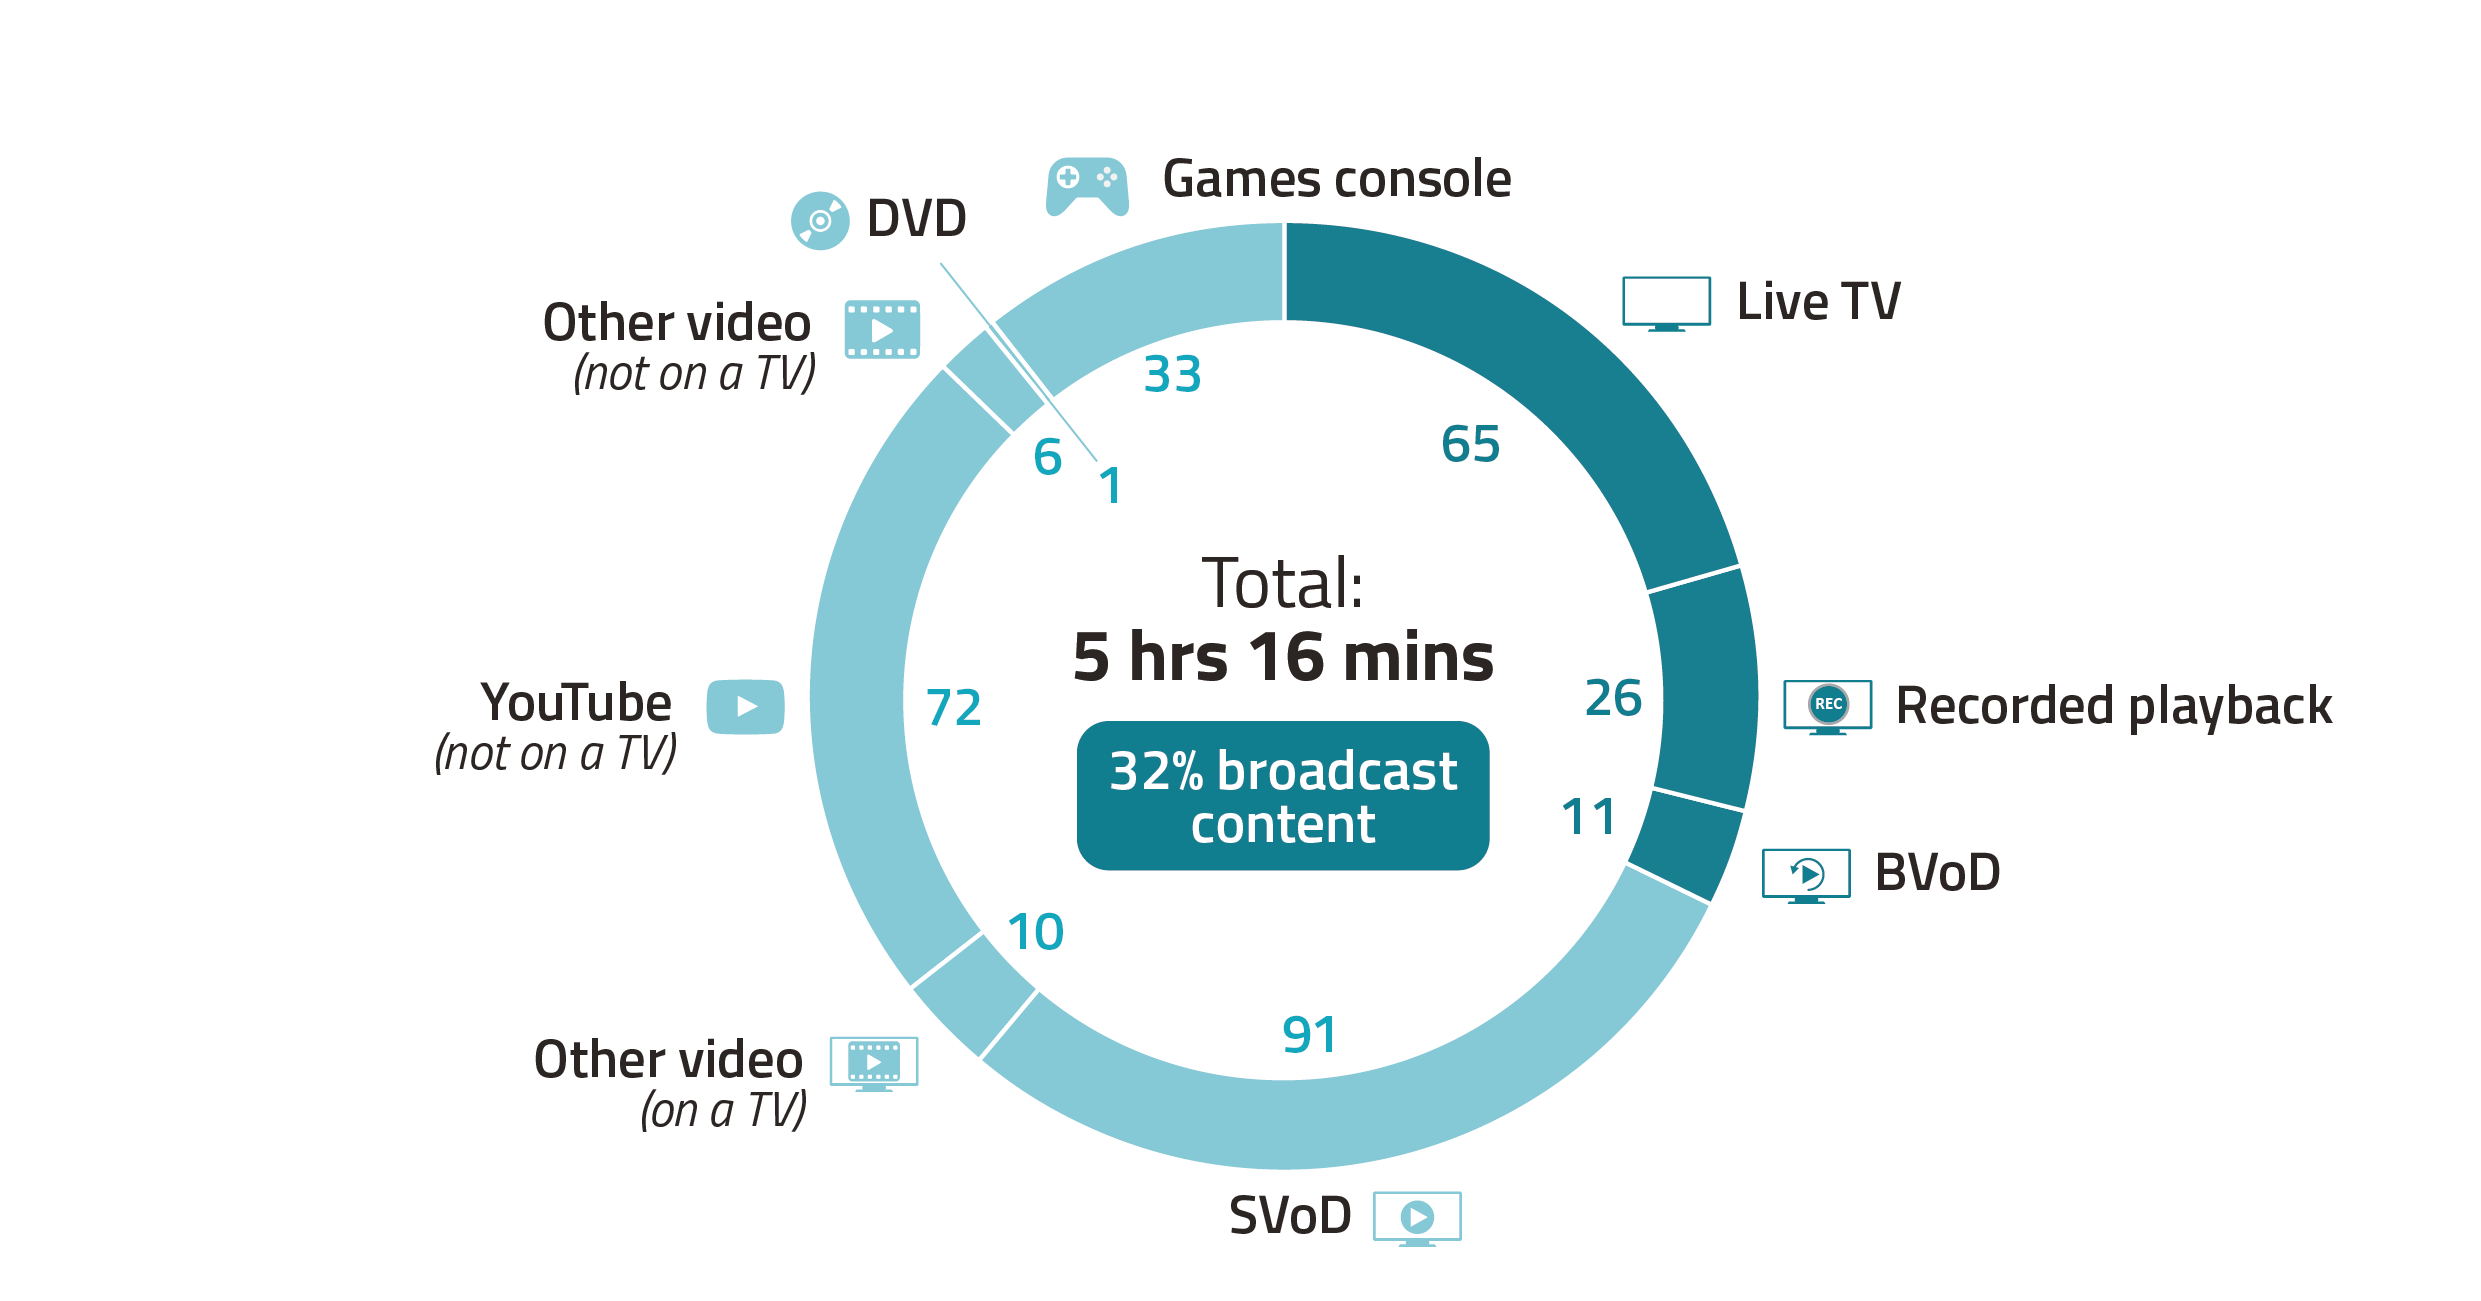 Image shows a doughnut chart showing the average minutes of viewing spent  per person per day for those aged 16-34, across different platforms in 2020. The total viewing per person per day across 2020 was 5 hours and 16 minutes.